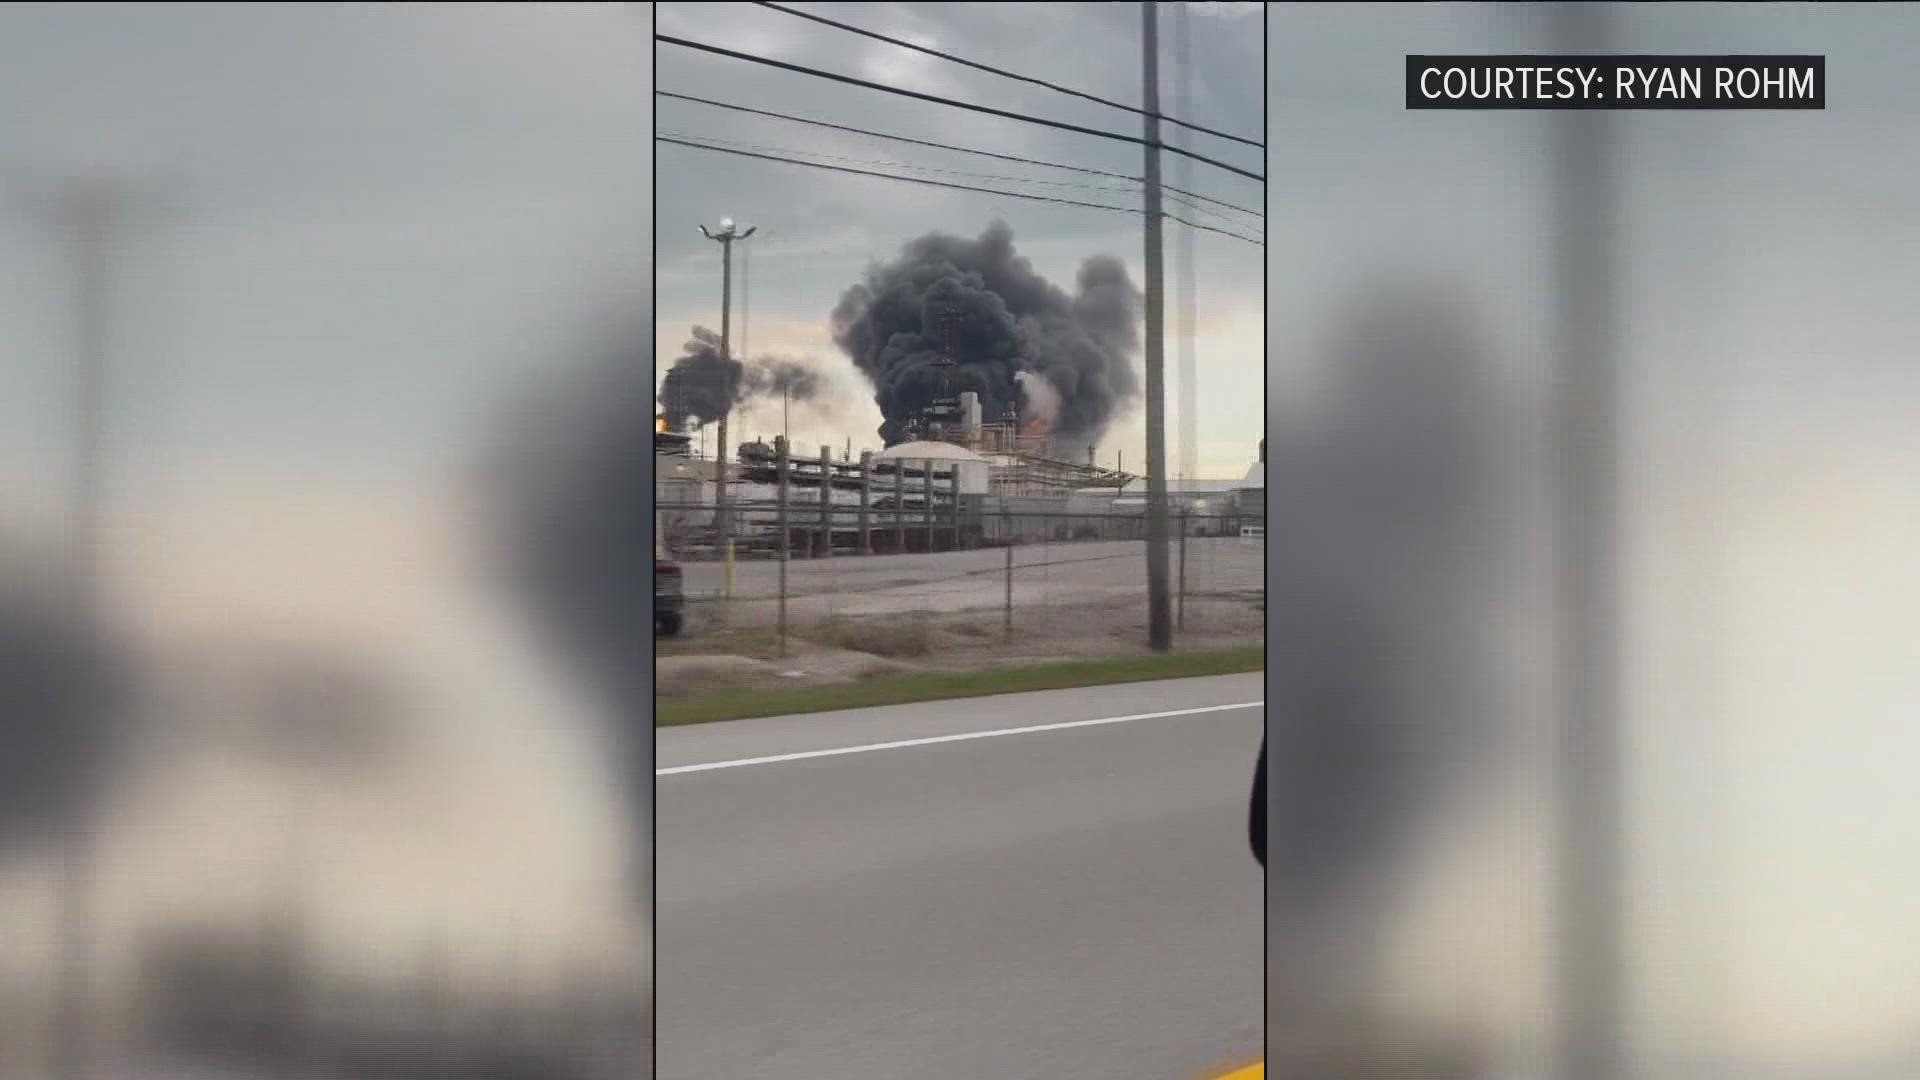 Heavy black smoke has been seen coming from the area of the northwest Ohio refinery on Cedar Point Road in Oregon and dispatch confirms reports of injuries.